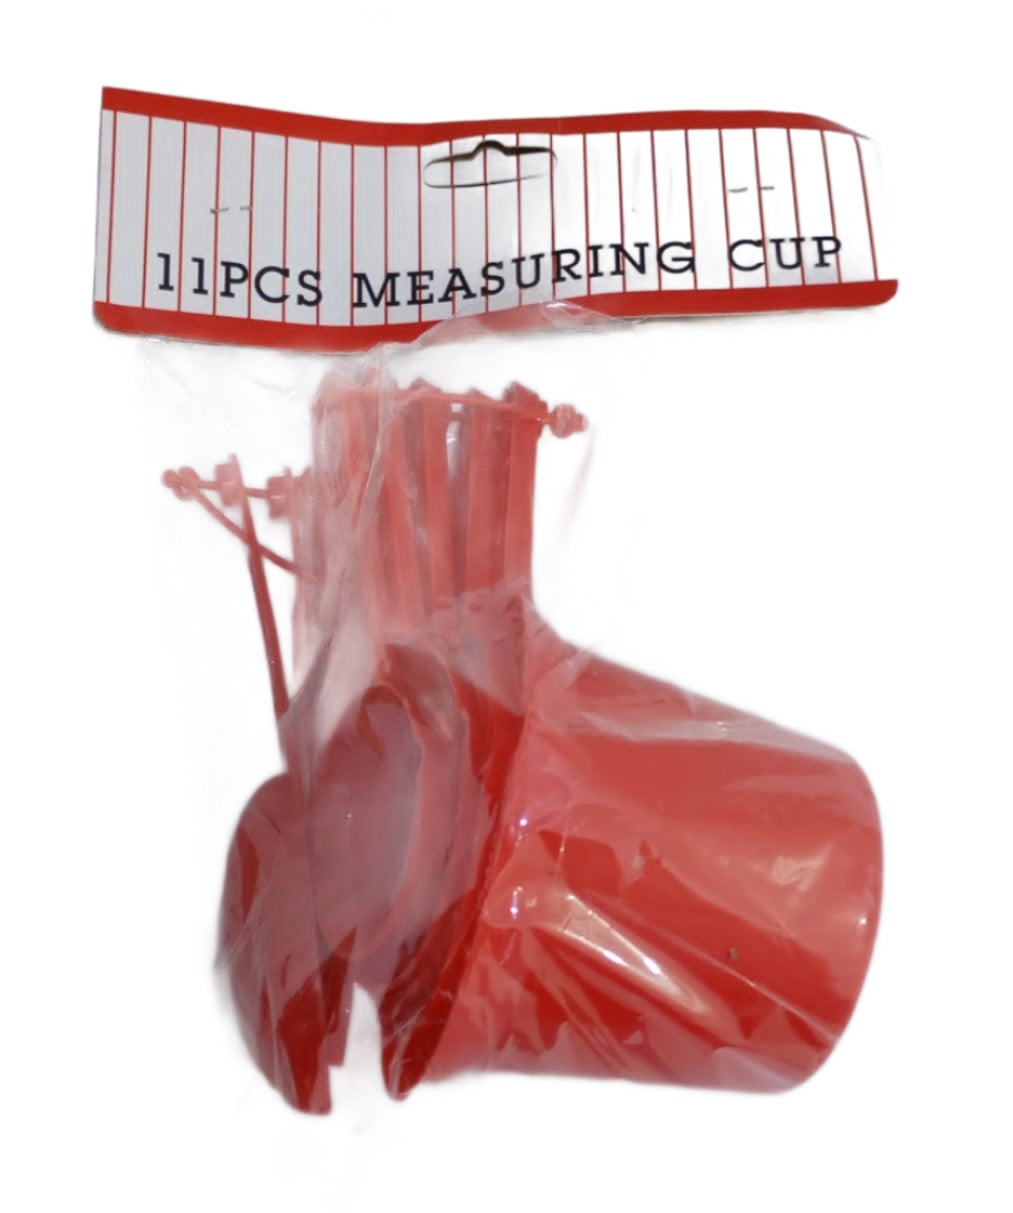 Variety Pack Measuring Cup, Pack of 11 Pieces l JLV8a